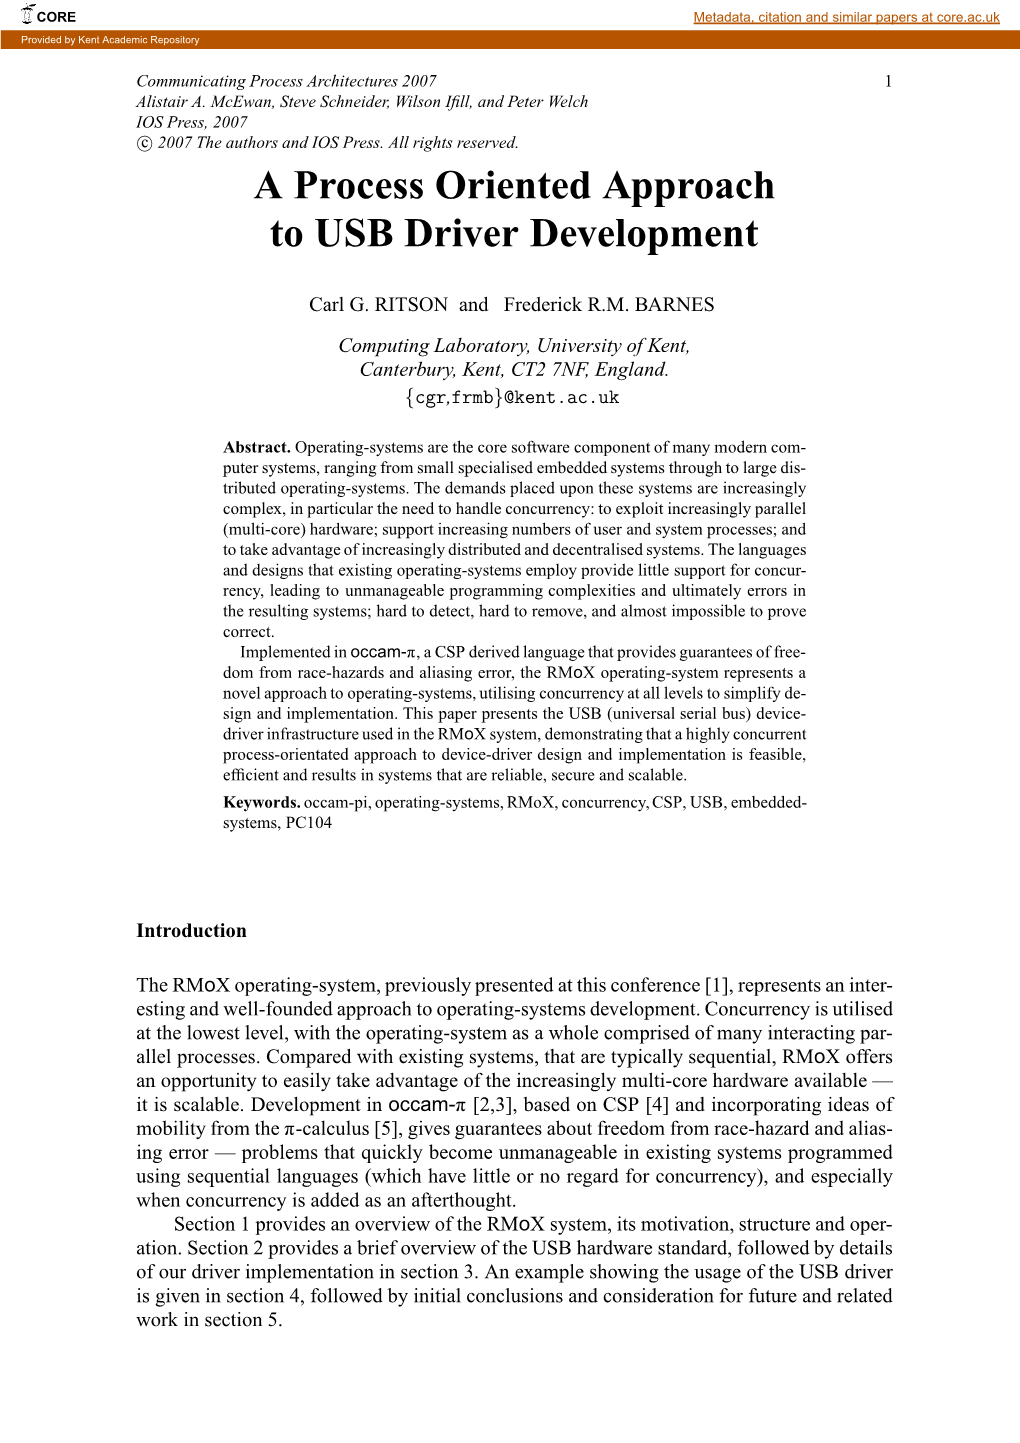 A Process Oriented Approach to USB Driver Development